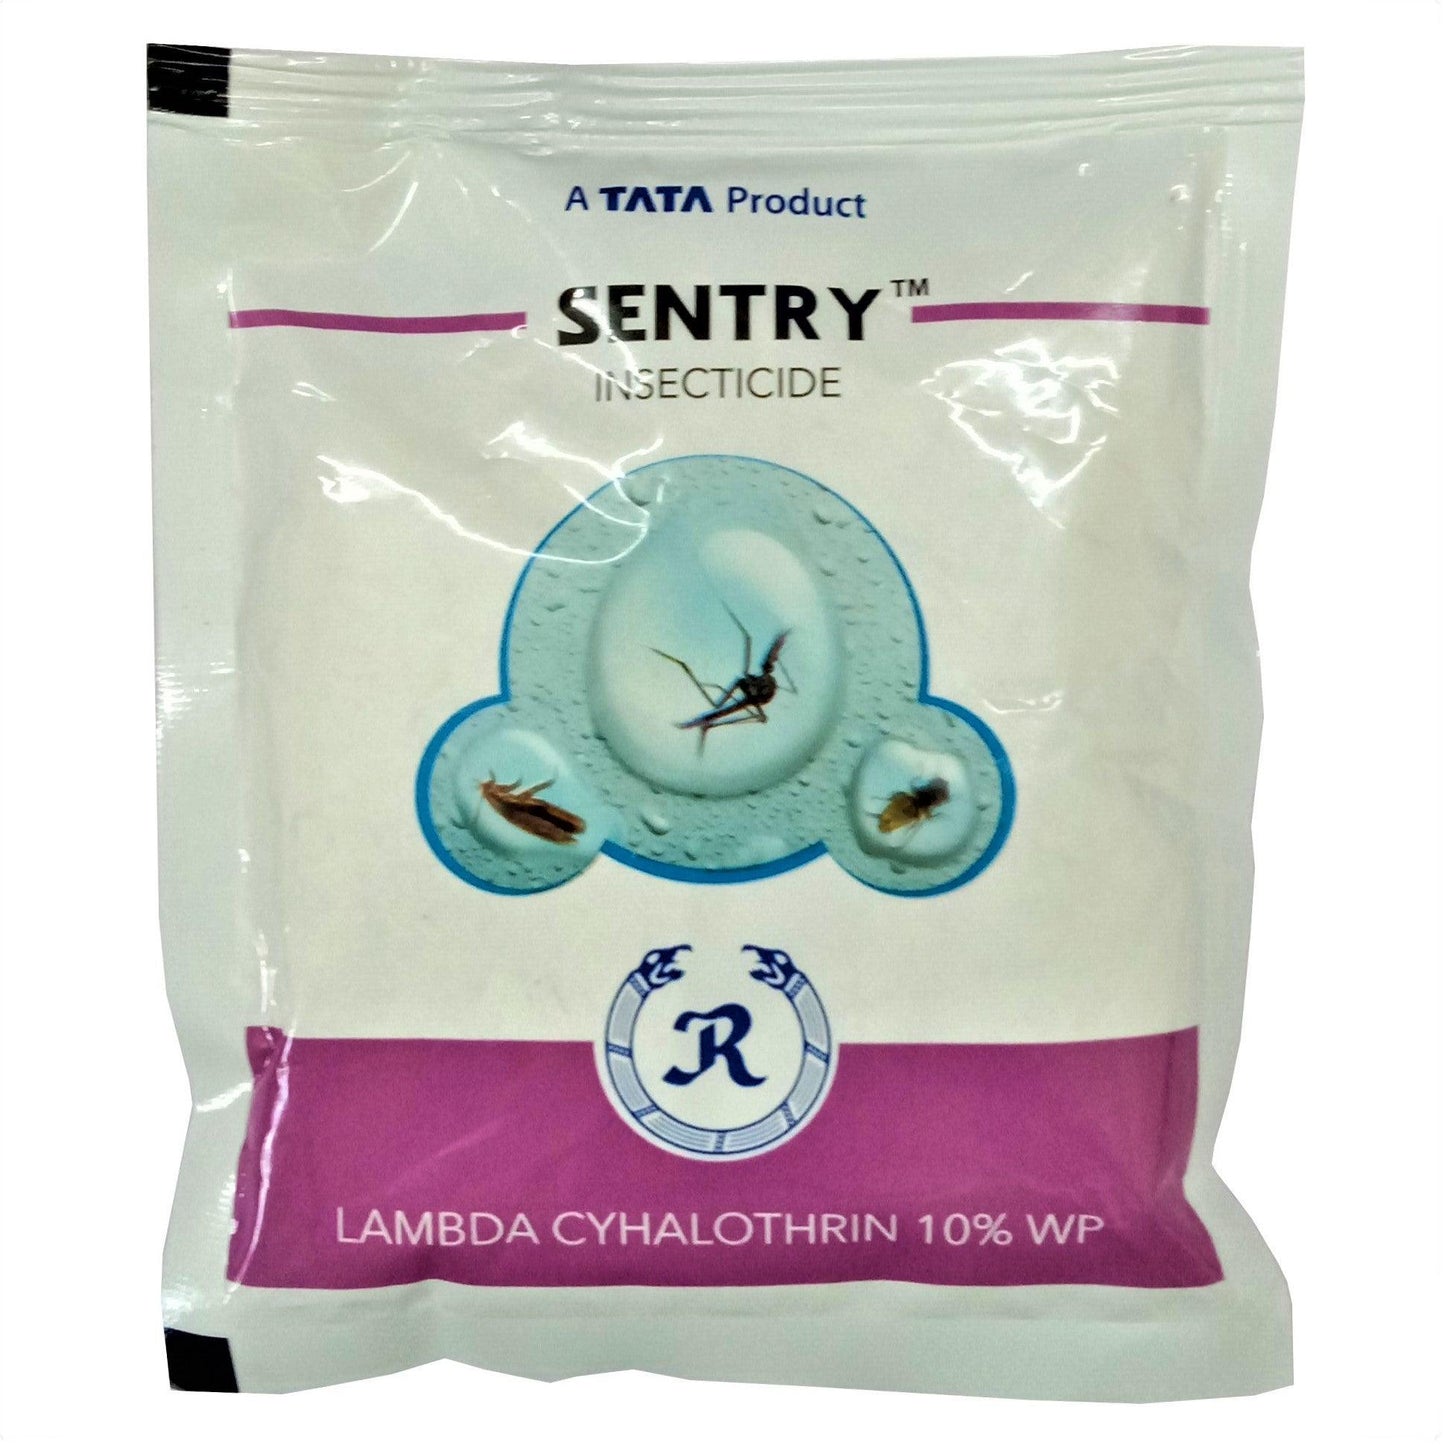 TATA Sentry (Lambda Cyhalothrin 10%) Insecticide for mosquitoes, houseflies, cockroaches - FarmMate.in